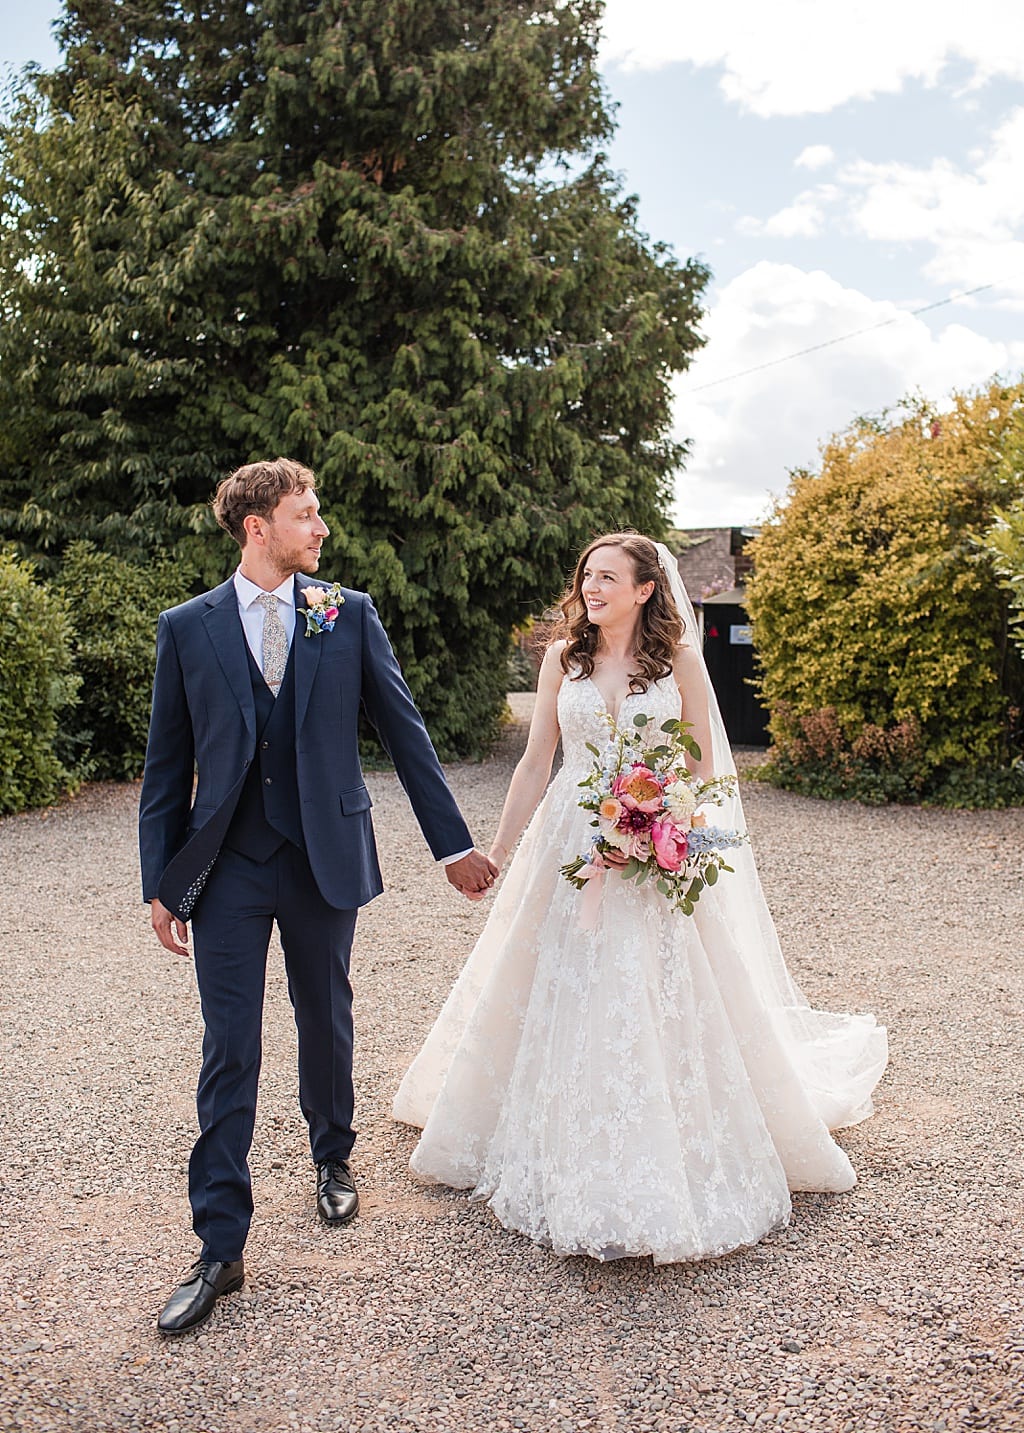 Groom wearing navy blue suit holding hands with his Bride carrying a colourful bouquet, walking together